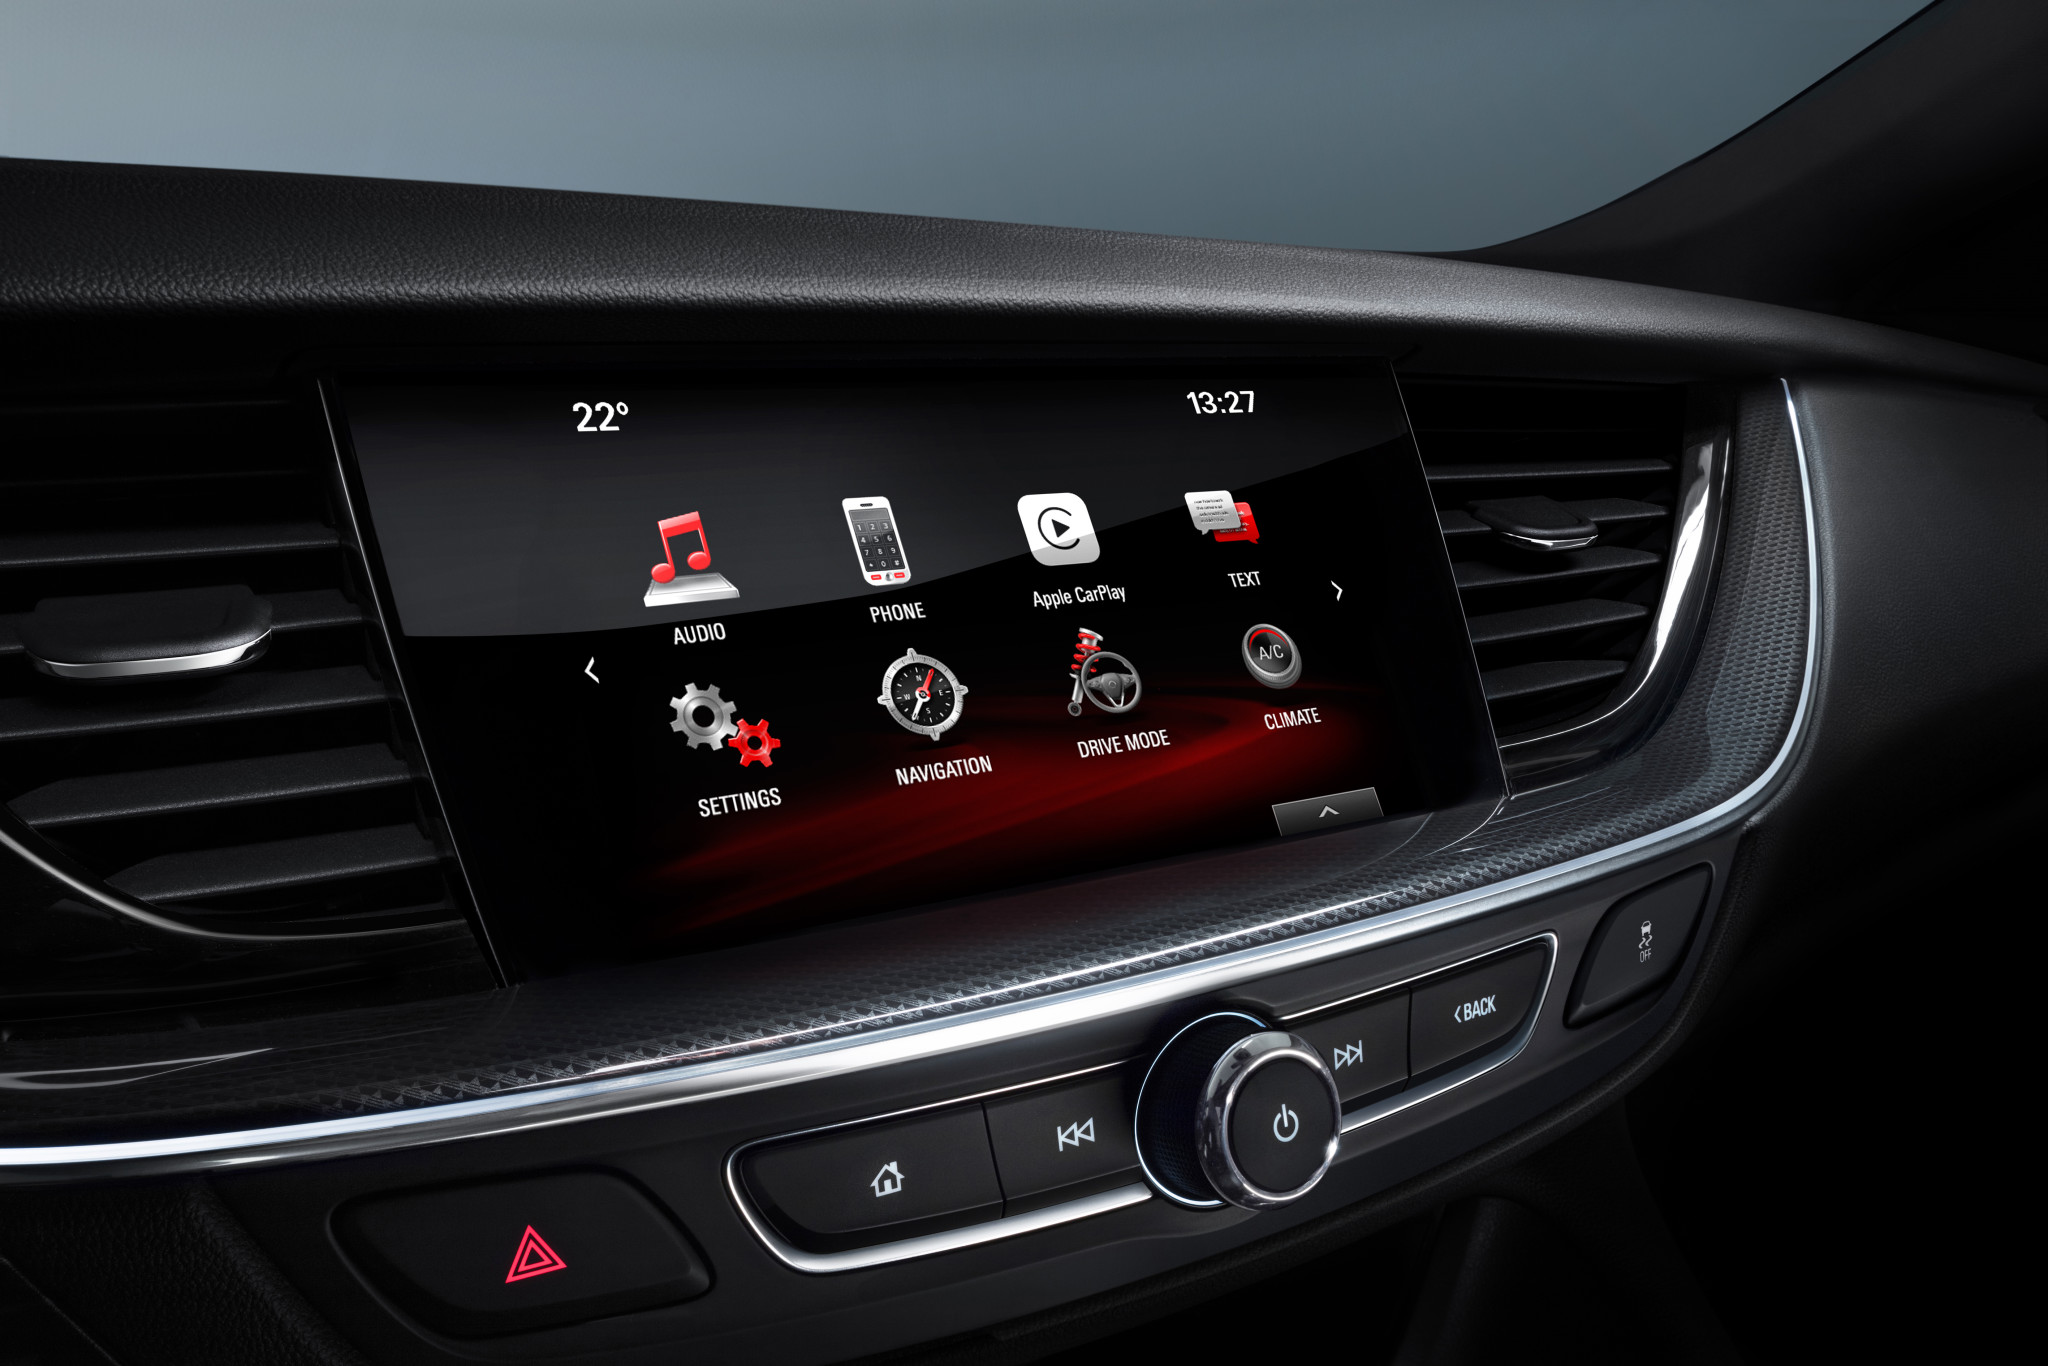 Best connections and top entertainment: The IntelliLink infotainment systems of the new Opel Insignia Sports Tourer – which are compatible with Apple CarPlay and Android Auto – can be controlled via the large color touchscreen.